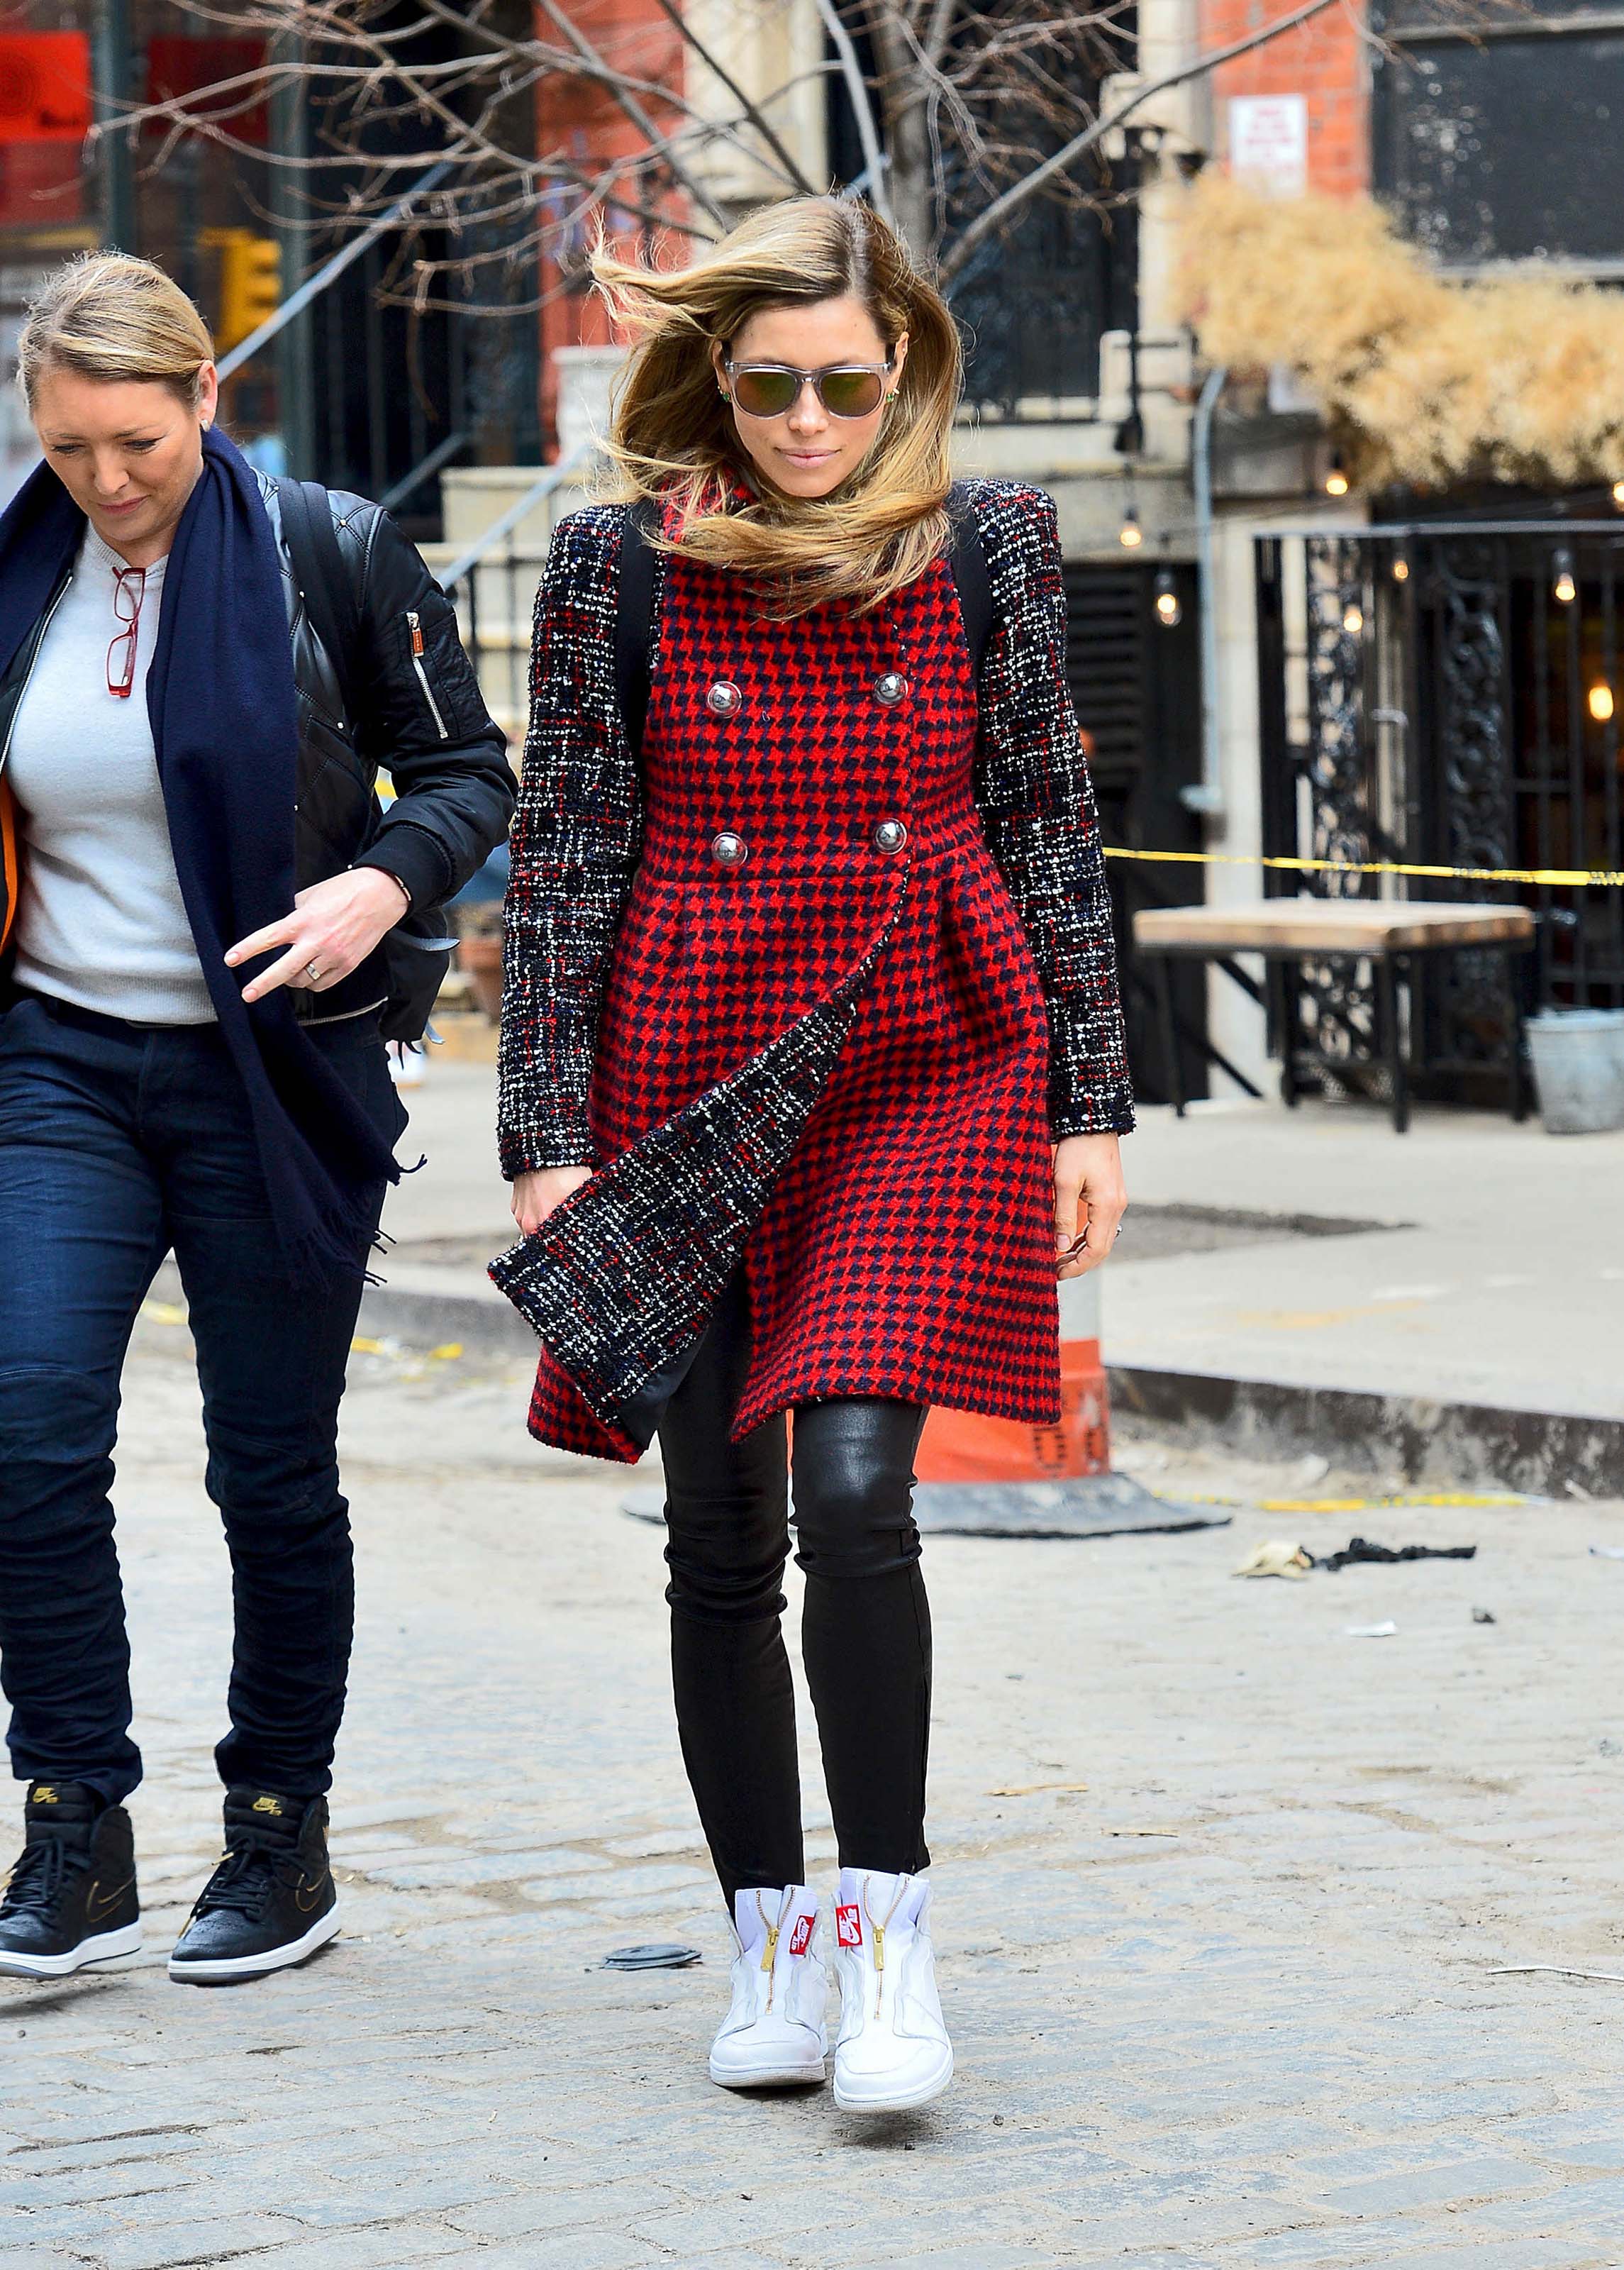 Jessica Biel out in NYC